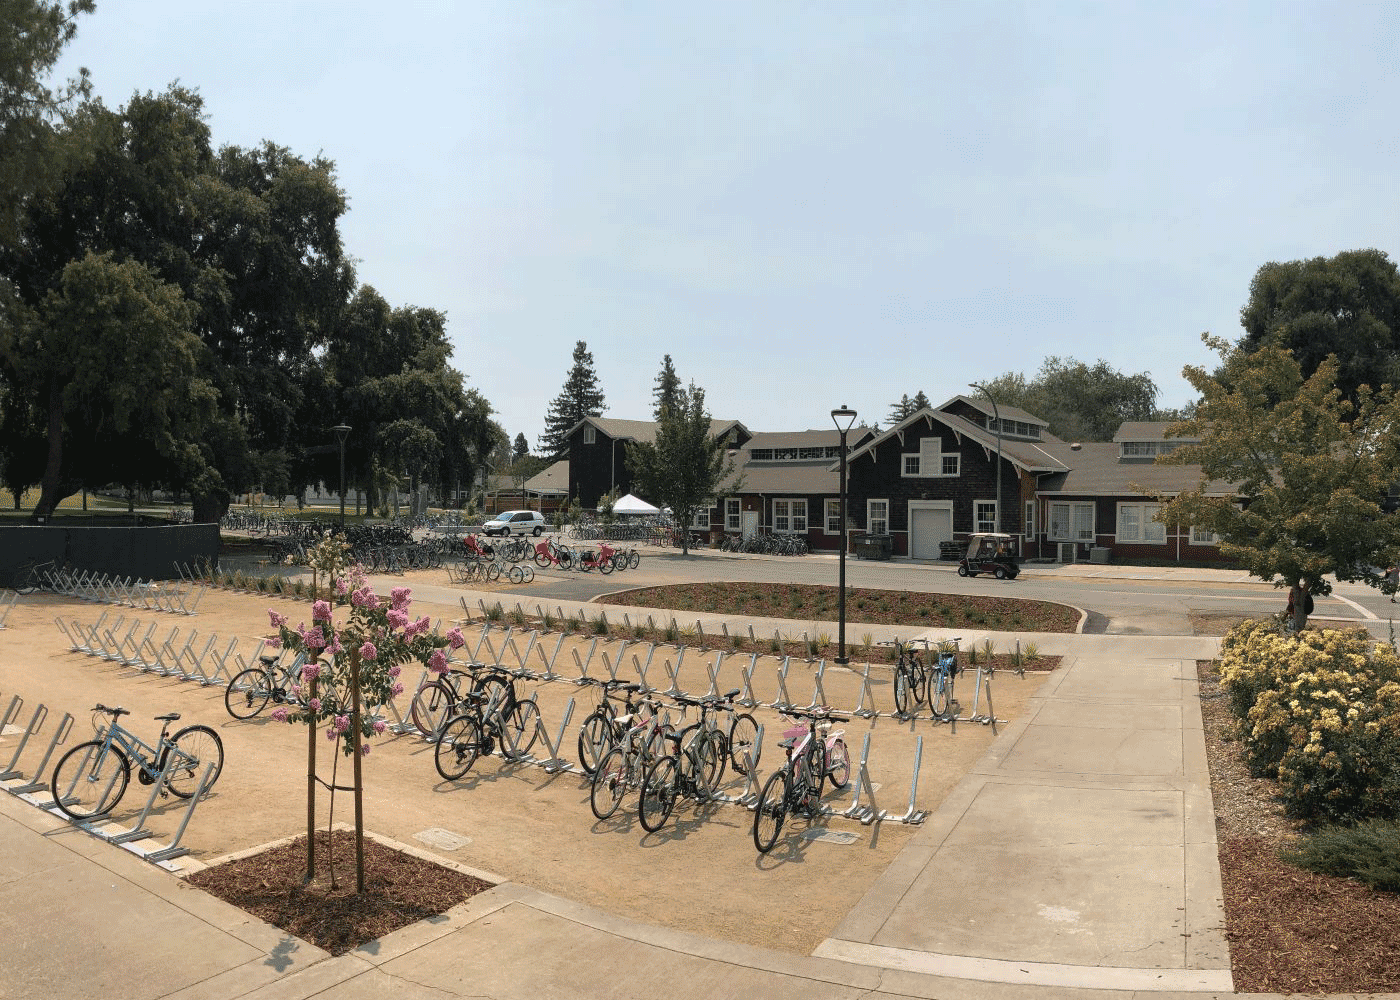 The western lawn at Rock Hall has been converted to a permeable bike parking area that drains into a vegetated basin. Once the basin reaches capacity, the overflow moves the water into the adjacent campus stormwater drainage system.